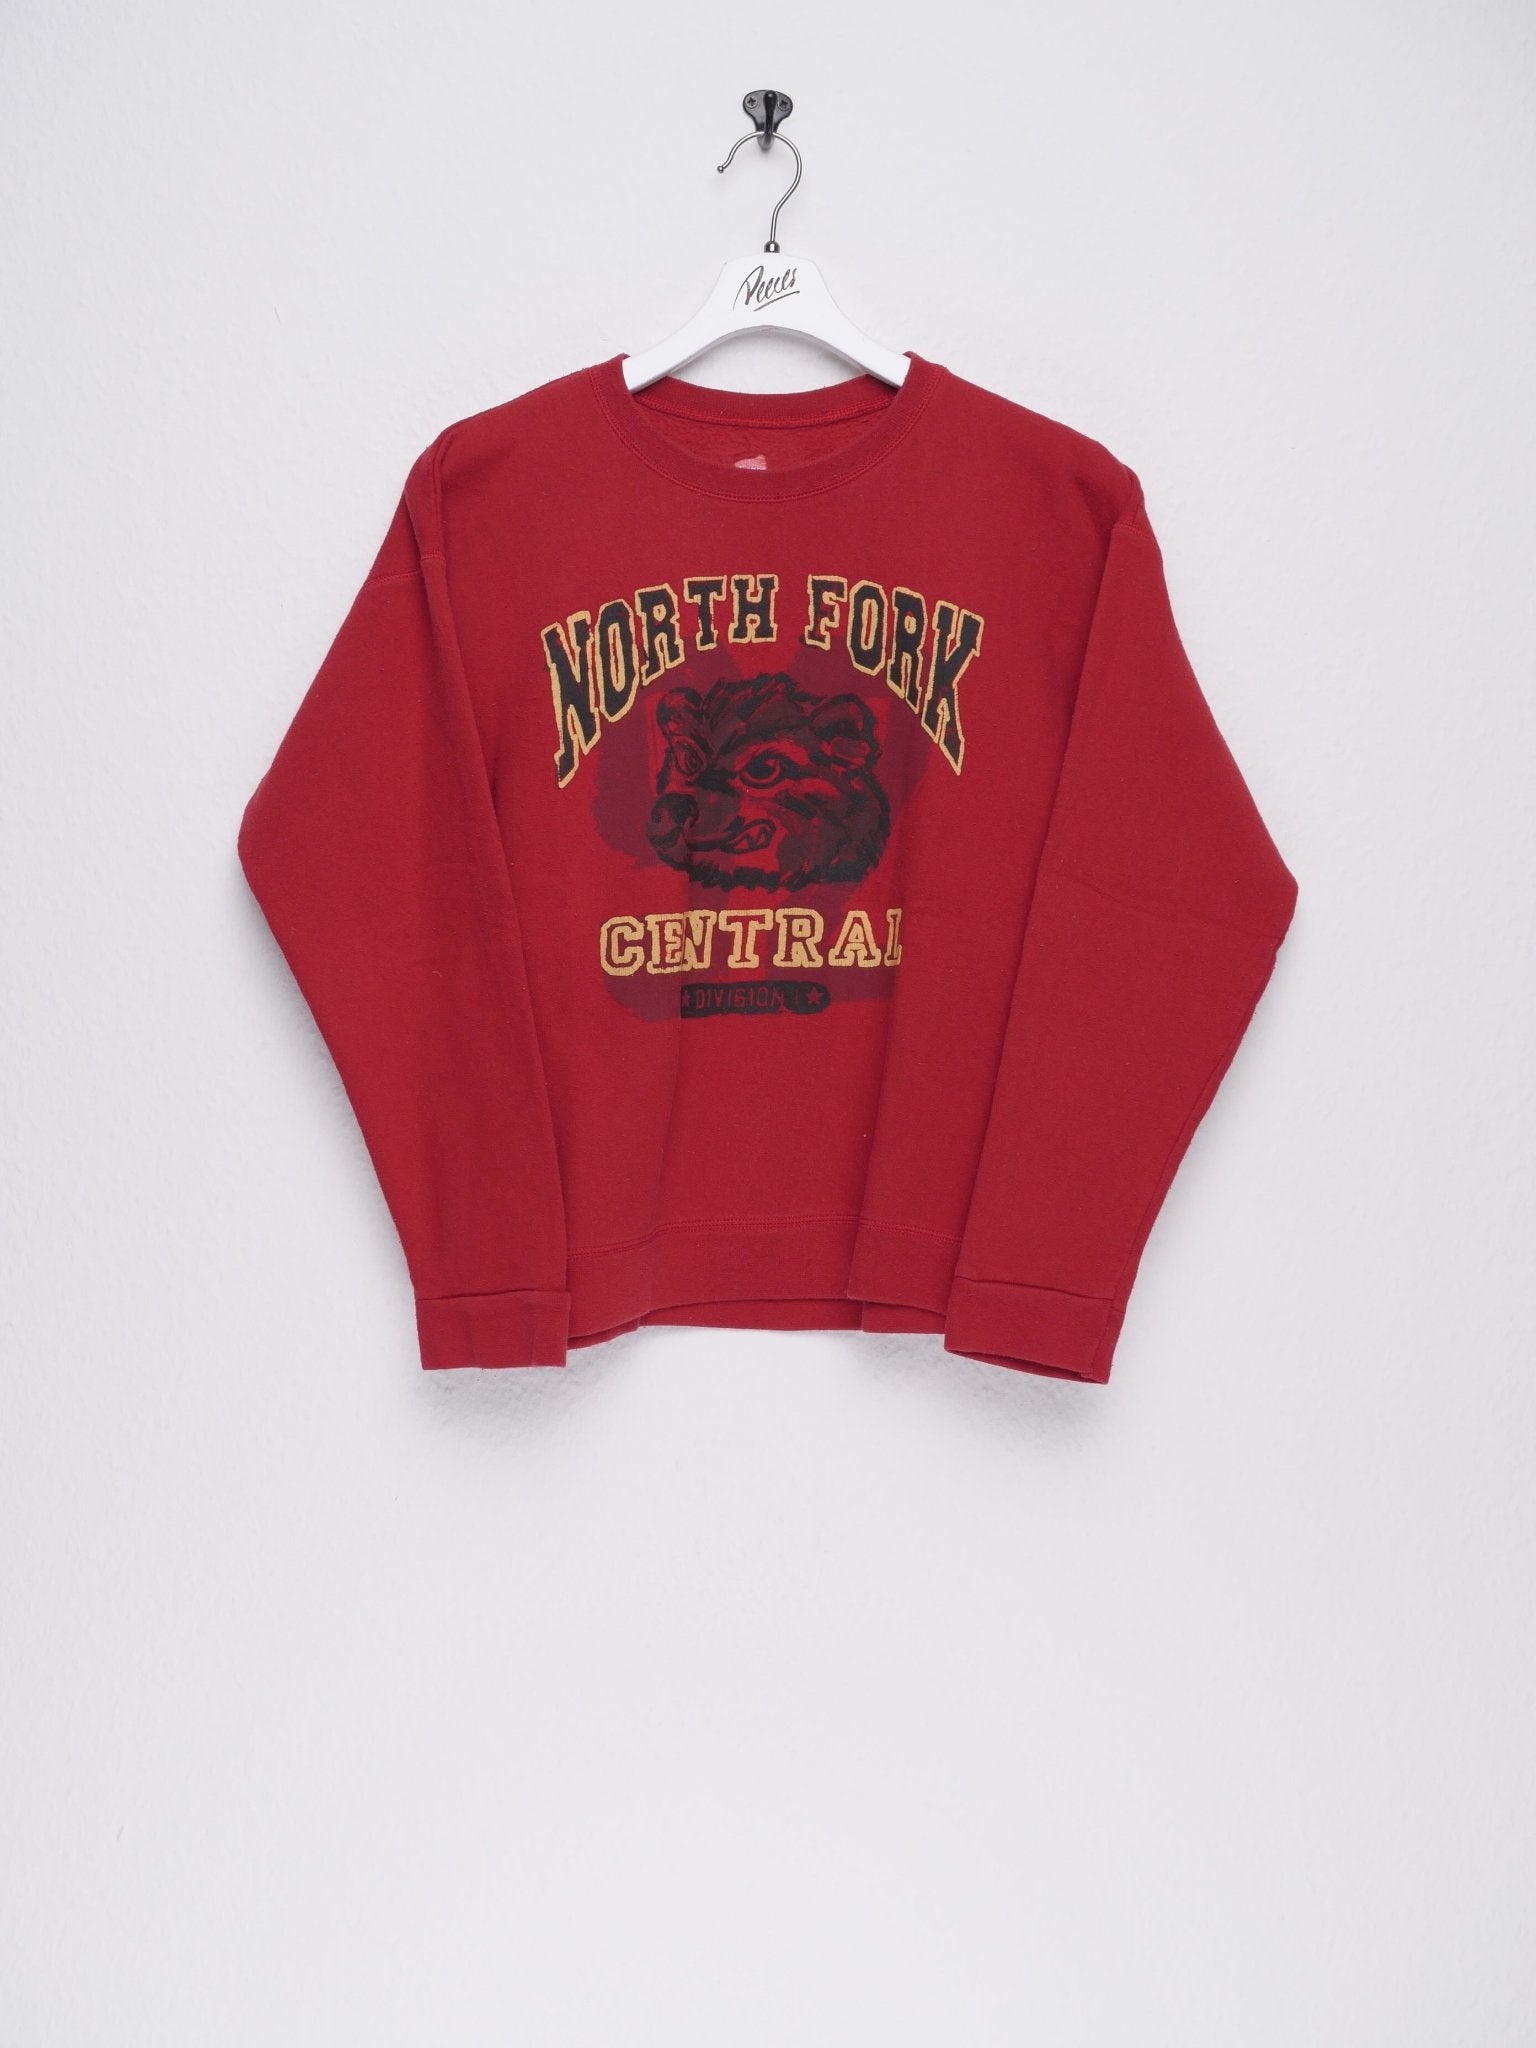 North Fork Central Division 1 printed Logo red Sweater - Peeces